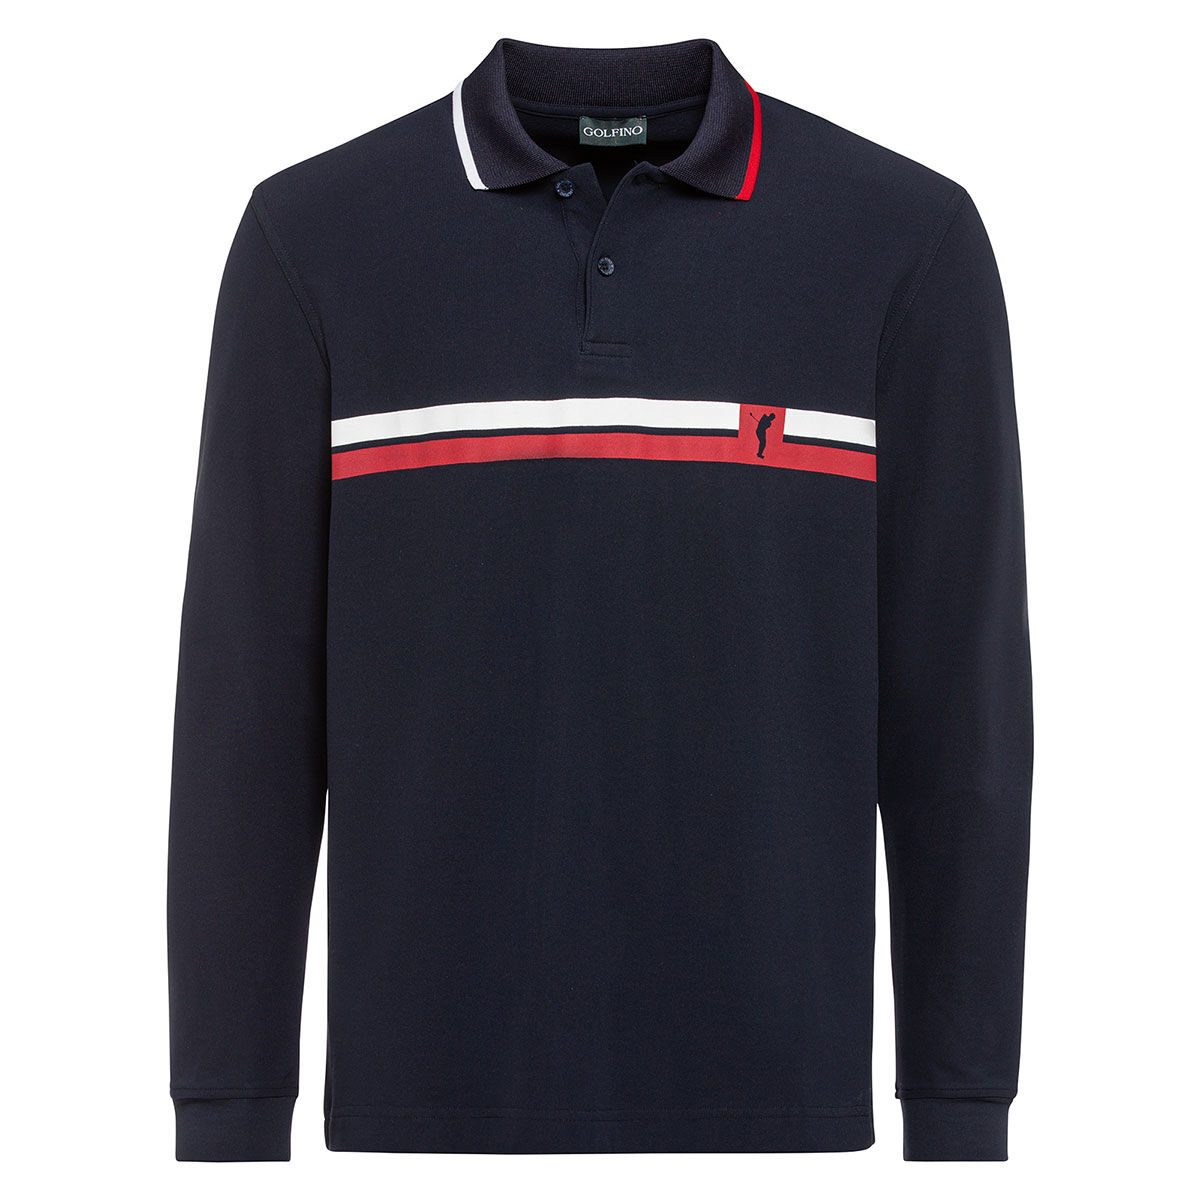 GOLFINO Navy Blue, Red and White Men’s Stripe Golf Polo Shirt, Size: Small | American Golf